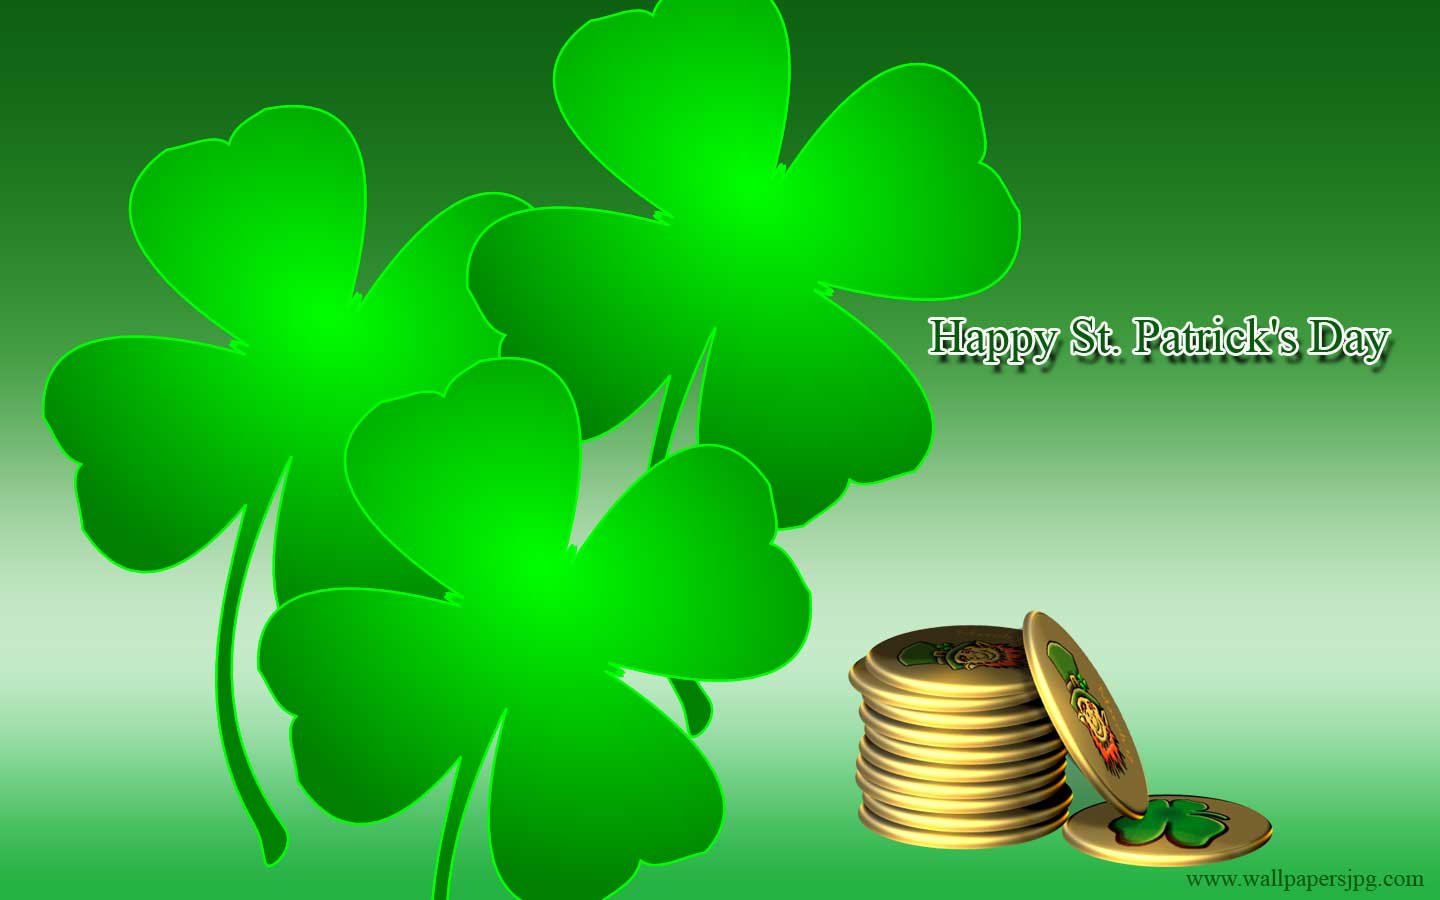 Image Of Fun Gallery St Patrick S Day Greetings Wallpaper Html